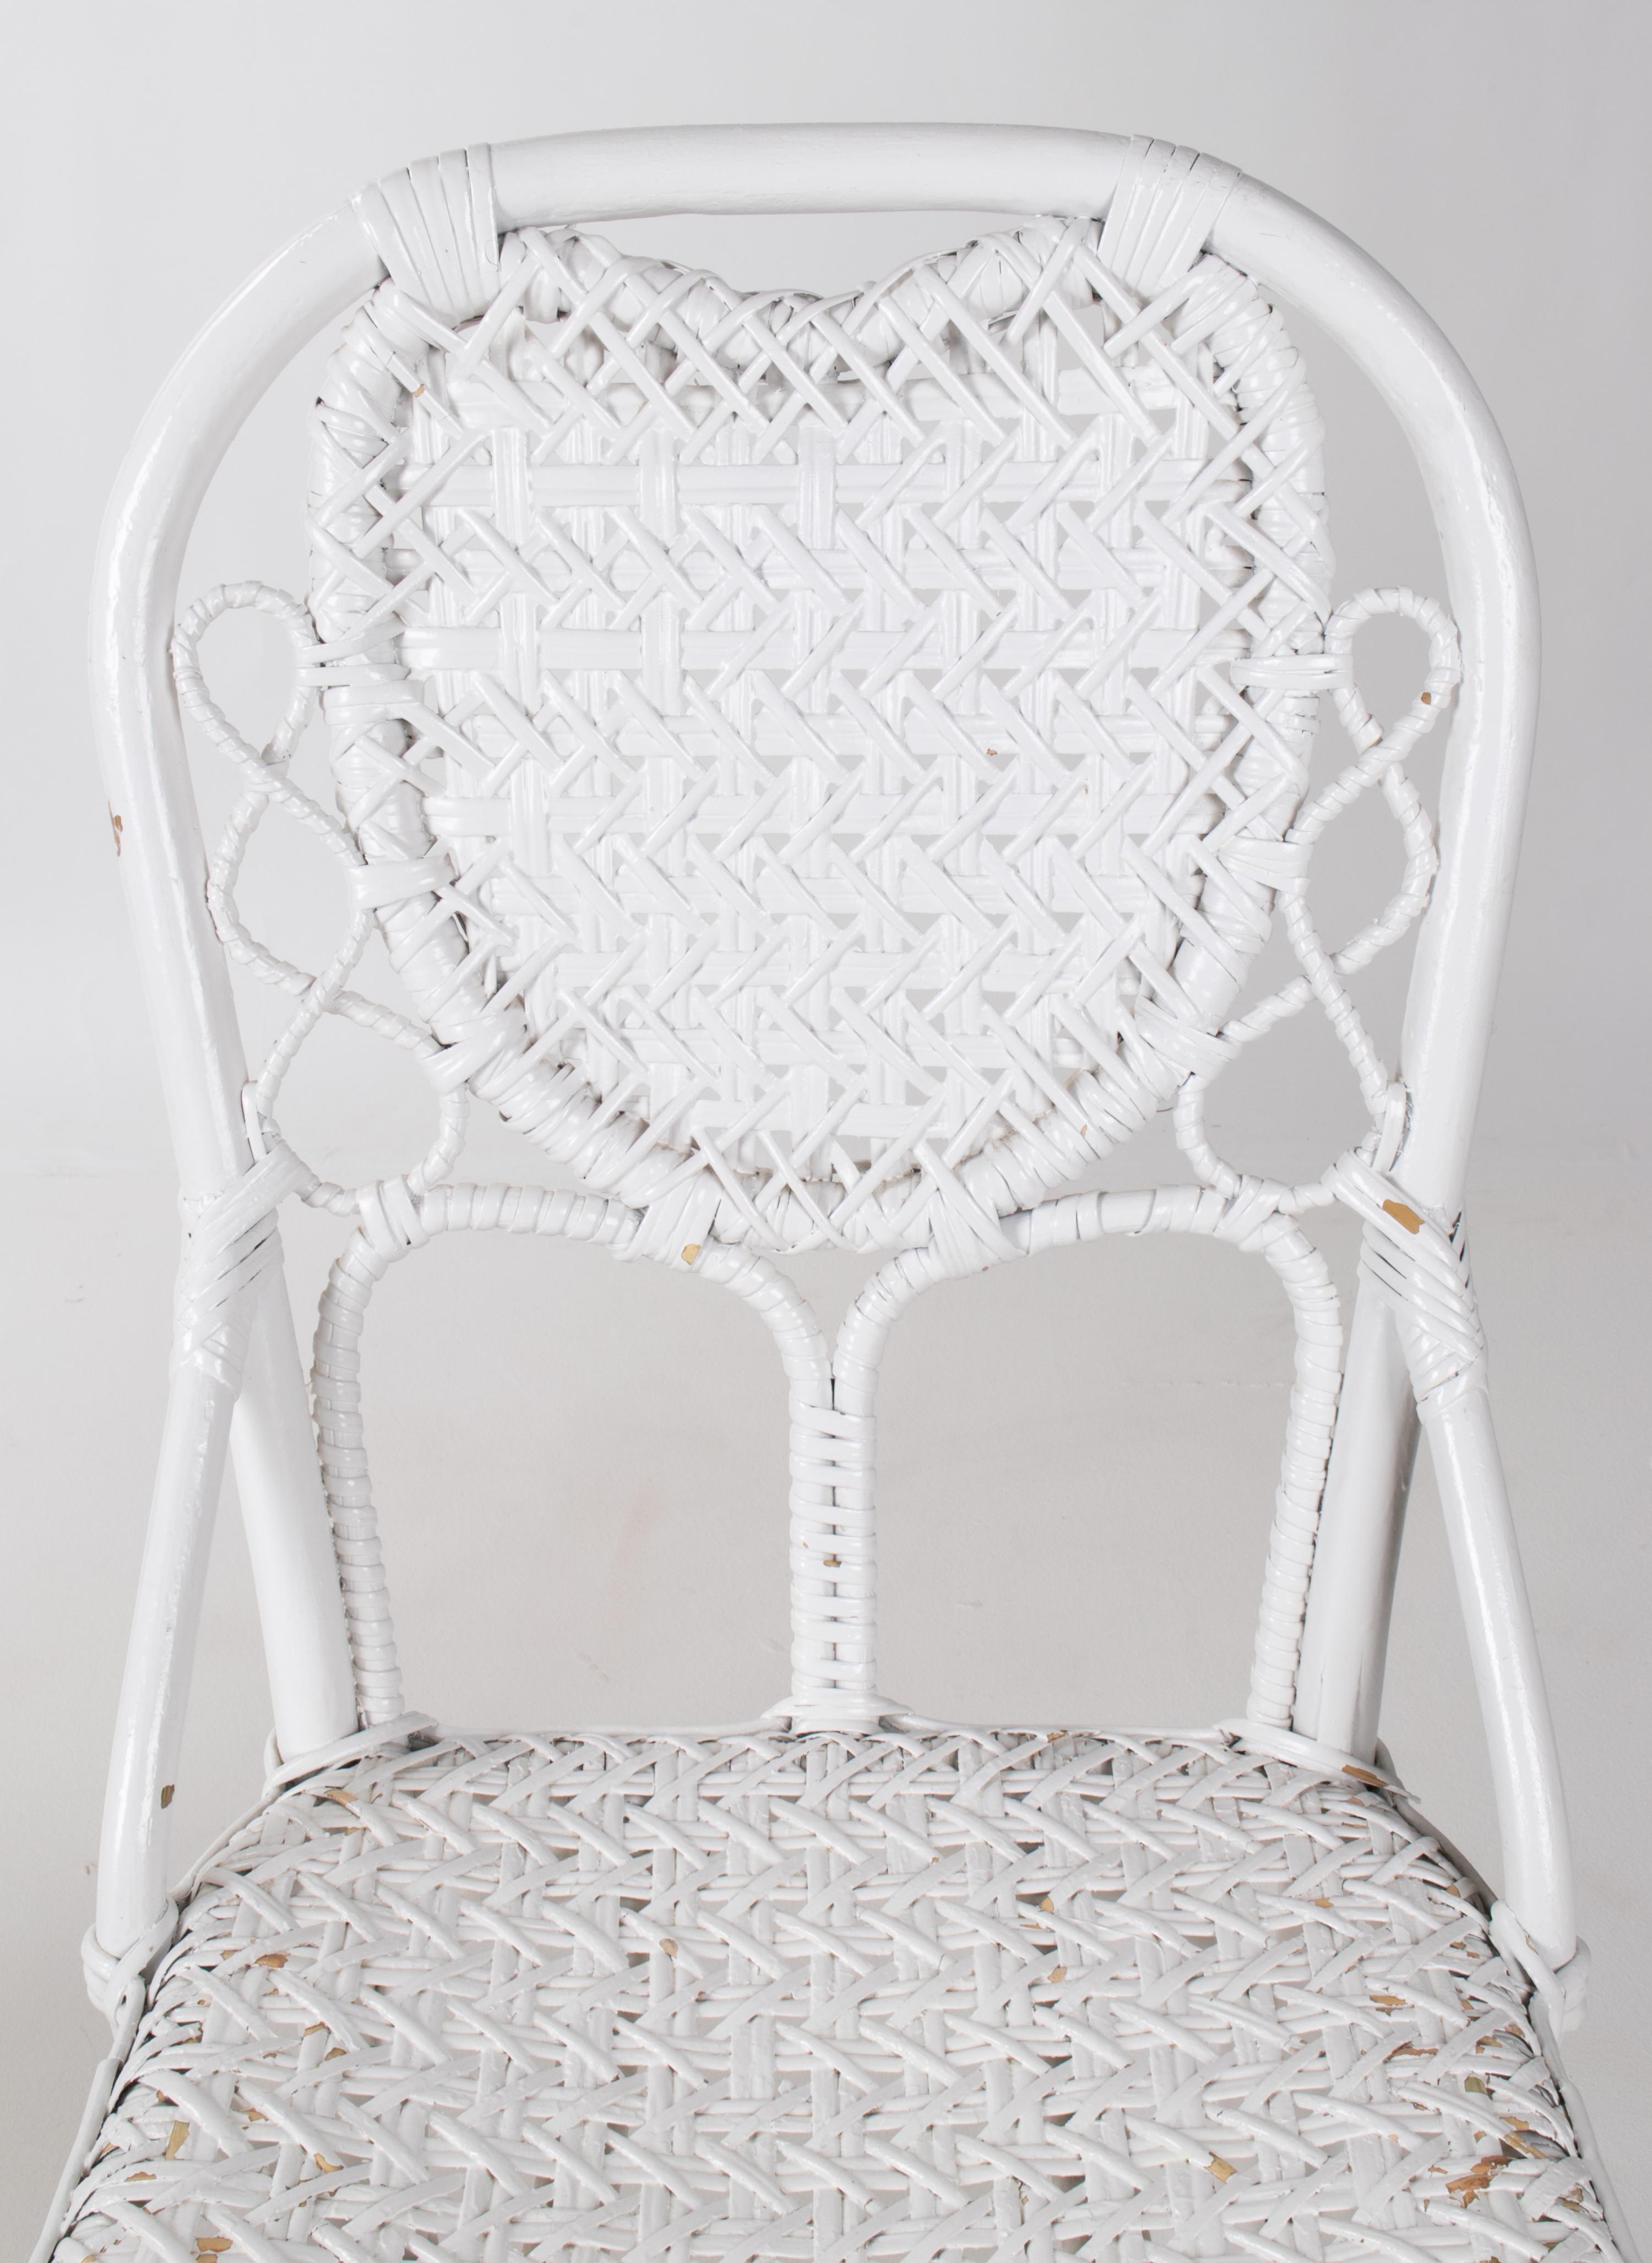 1970s Pair of Spanish Handmade White Wicker Wooden Chairs For Sale 2